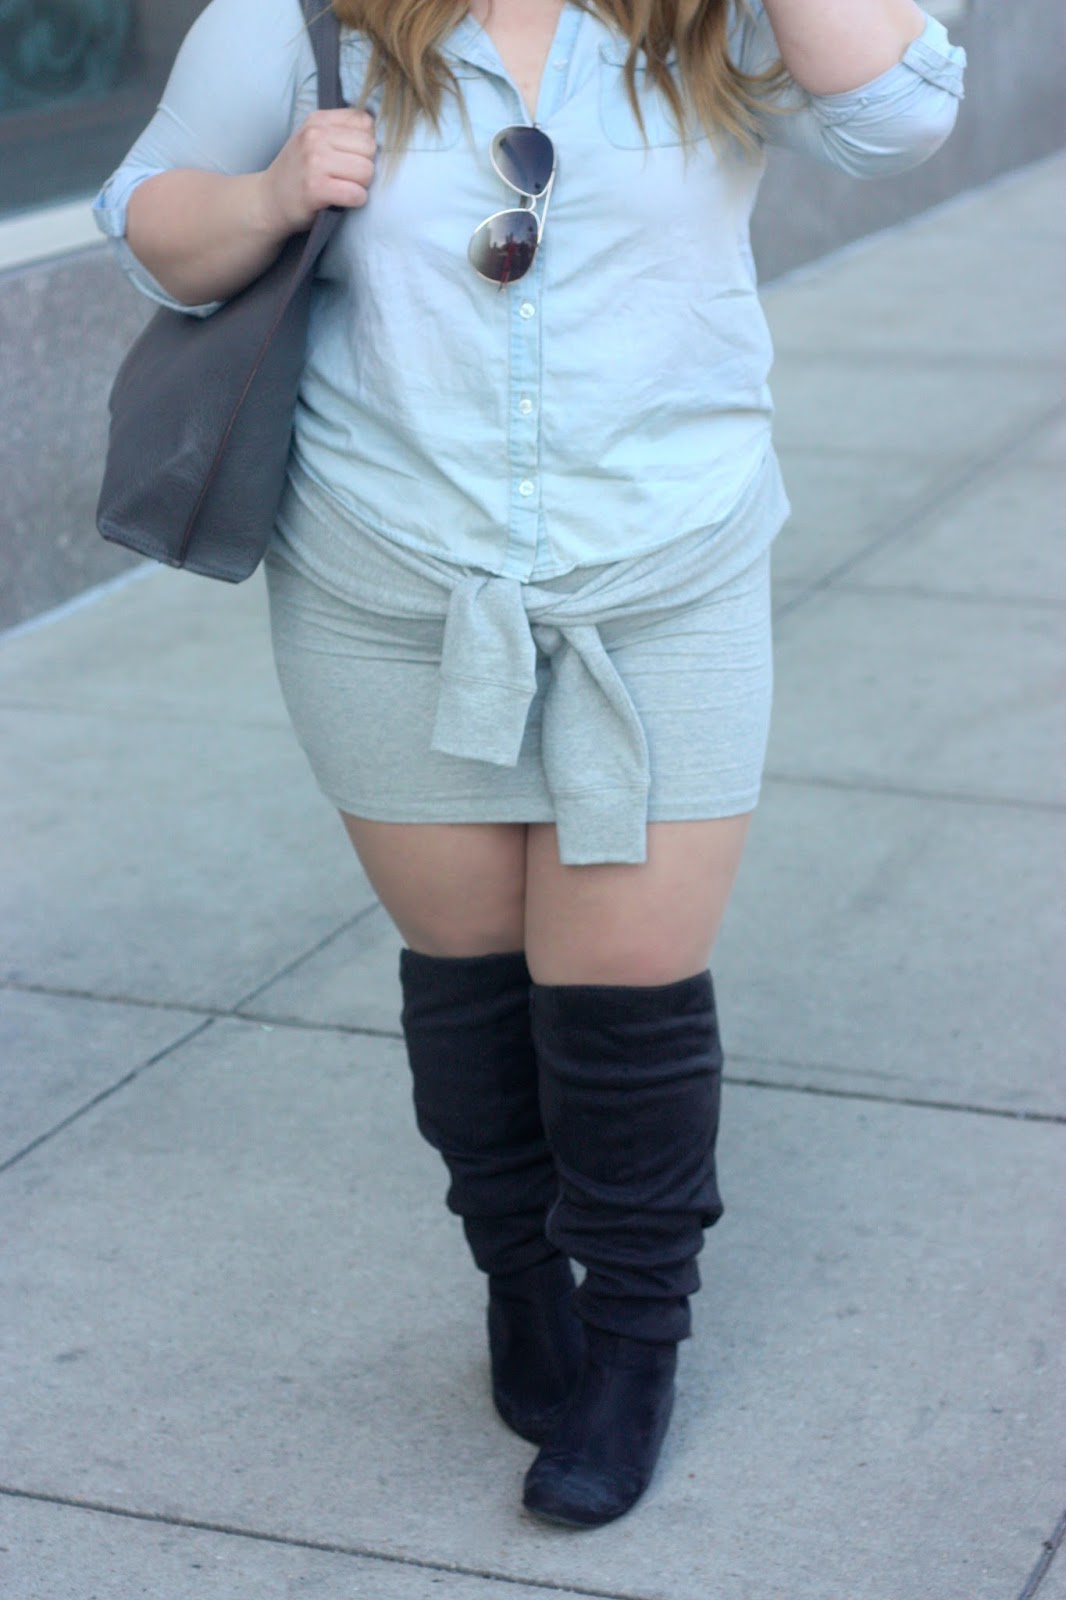 natalie in the city, natalie craig, chicago, ps fashion, plus size fashion blogger, how to wear a tie waist skirt, curvy, fatshion, charlotte russe plus, denim button up, knee high wide calf suede boots, bottle blonde